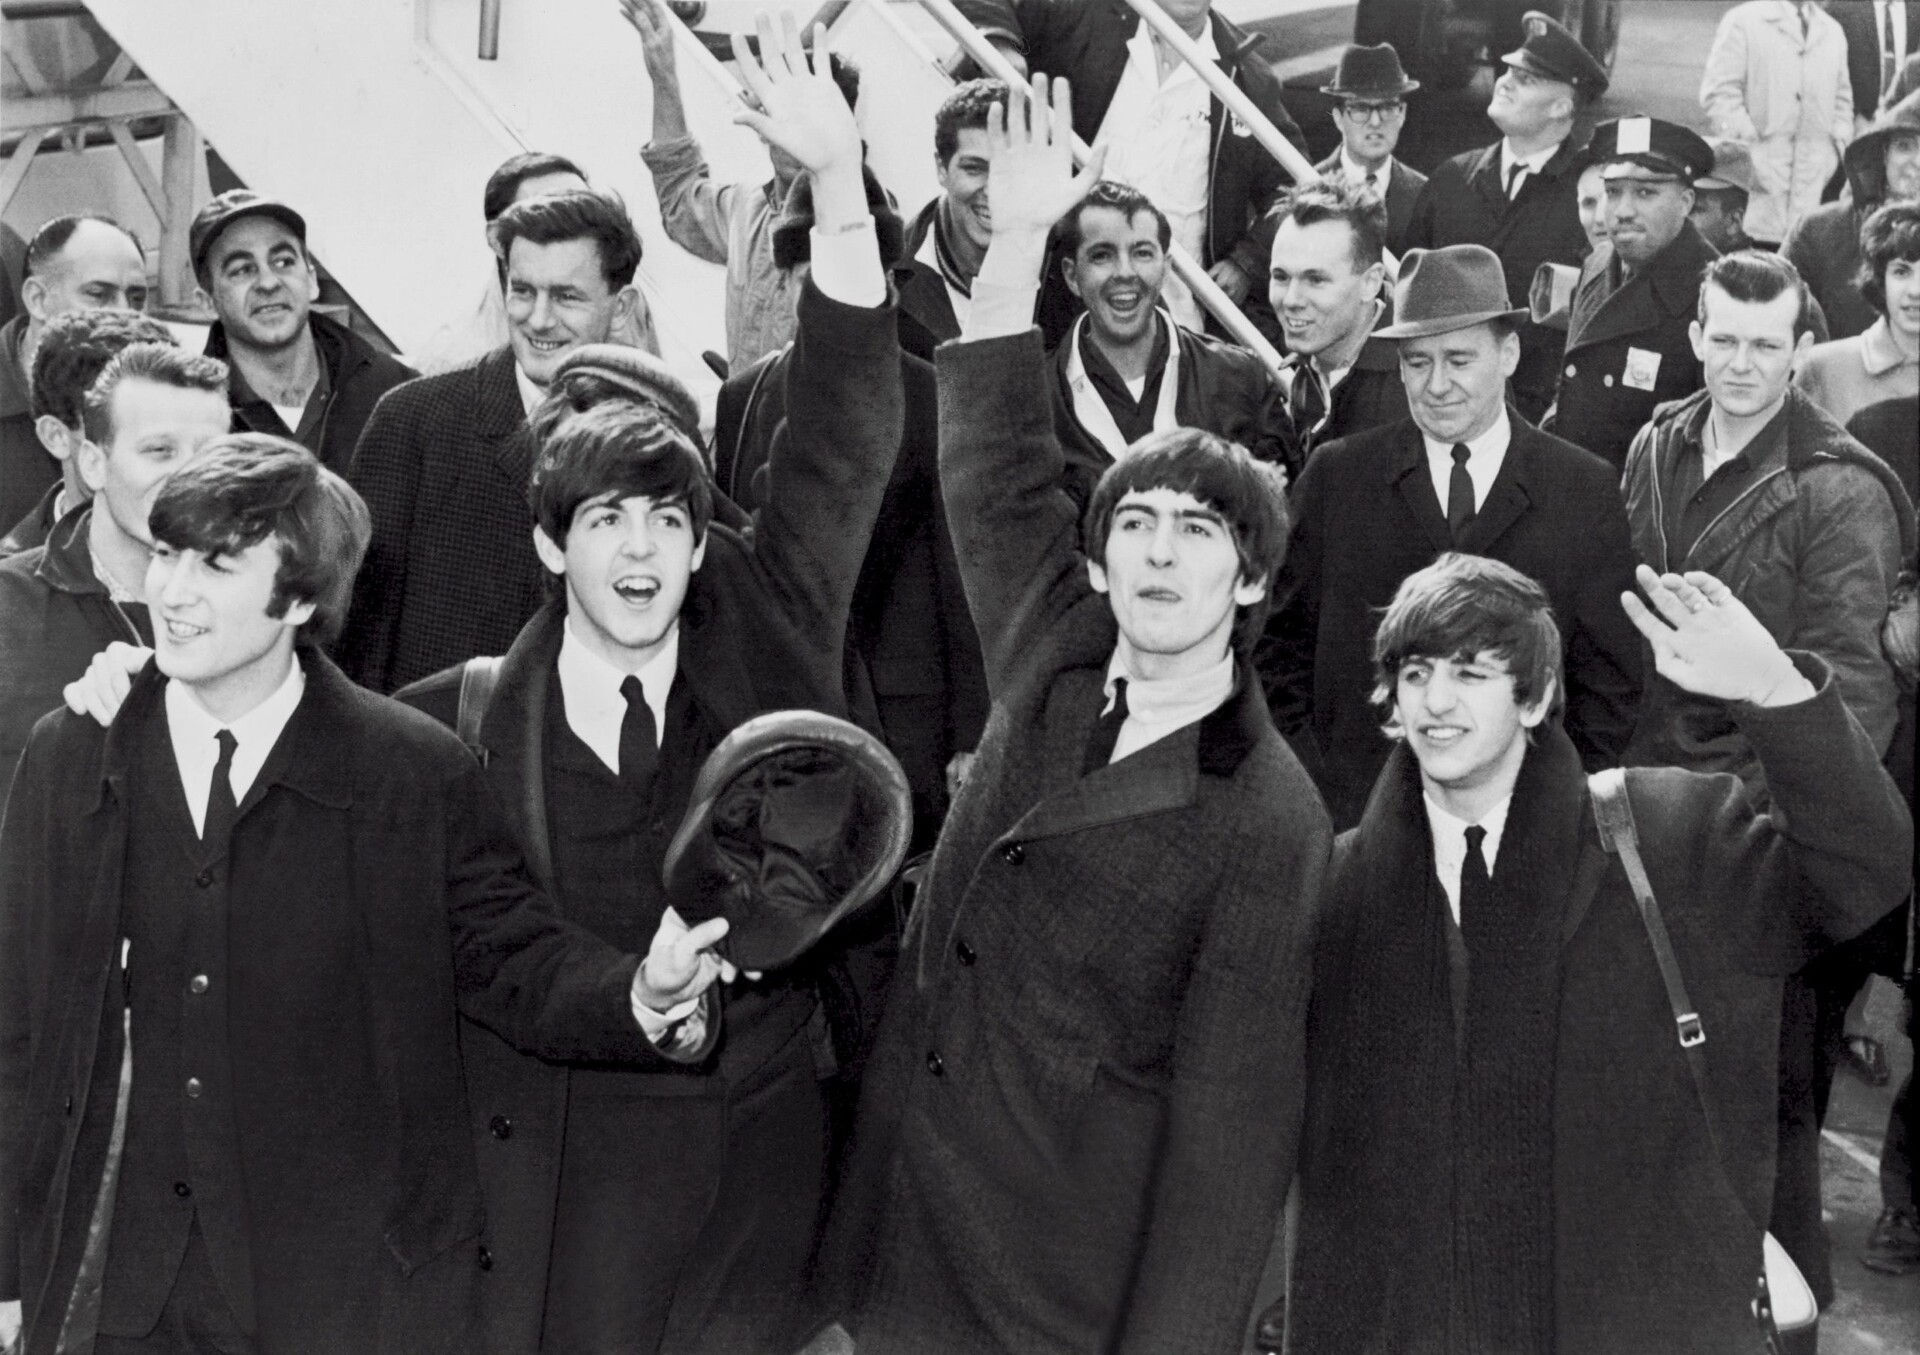 The Beatles, famous musicians stepping off a plane, waving to a crowd of admirers.